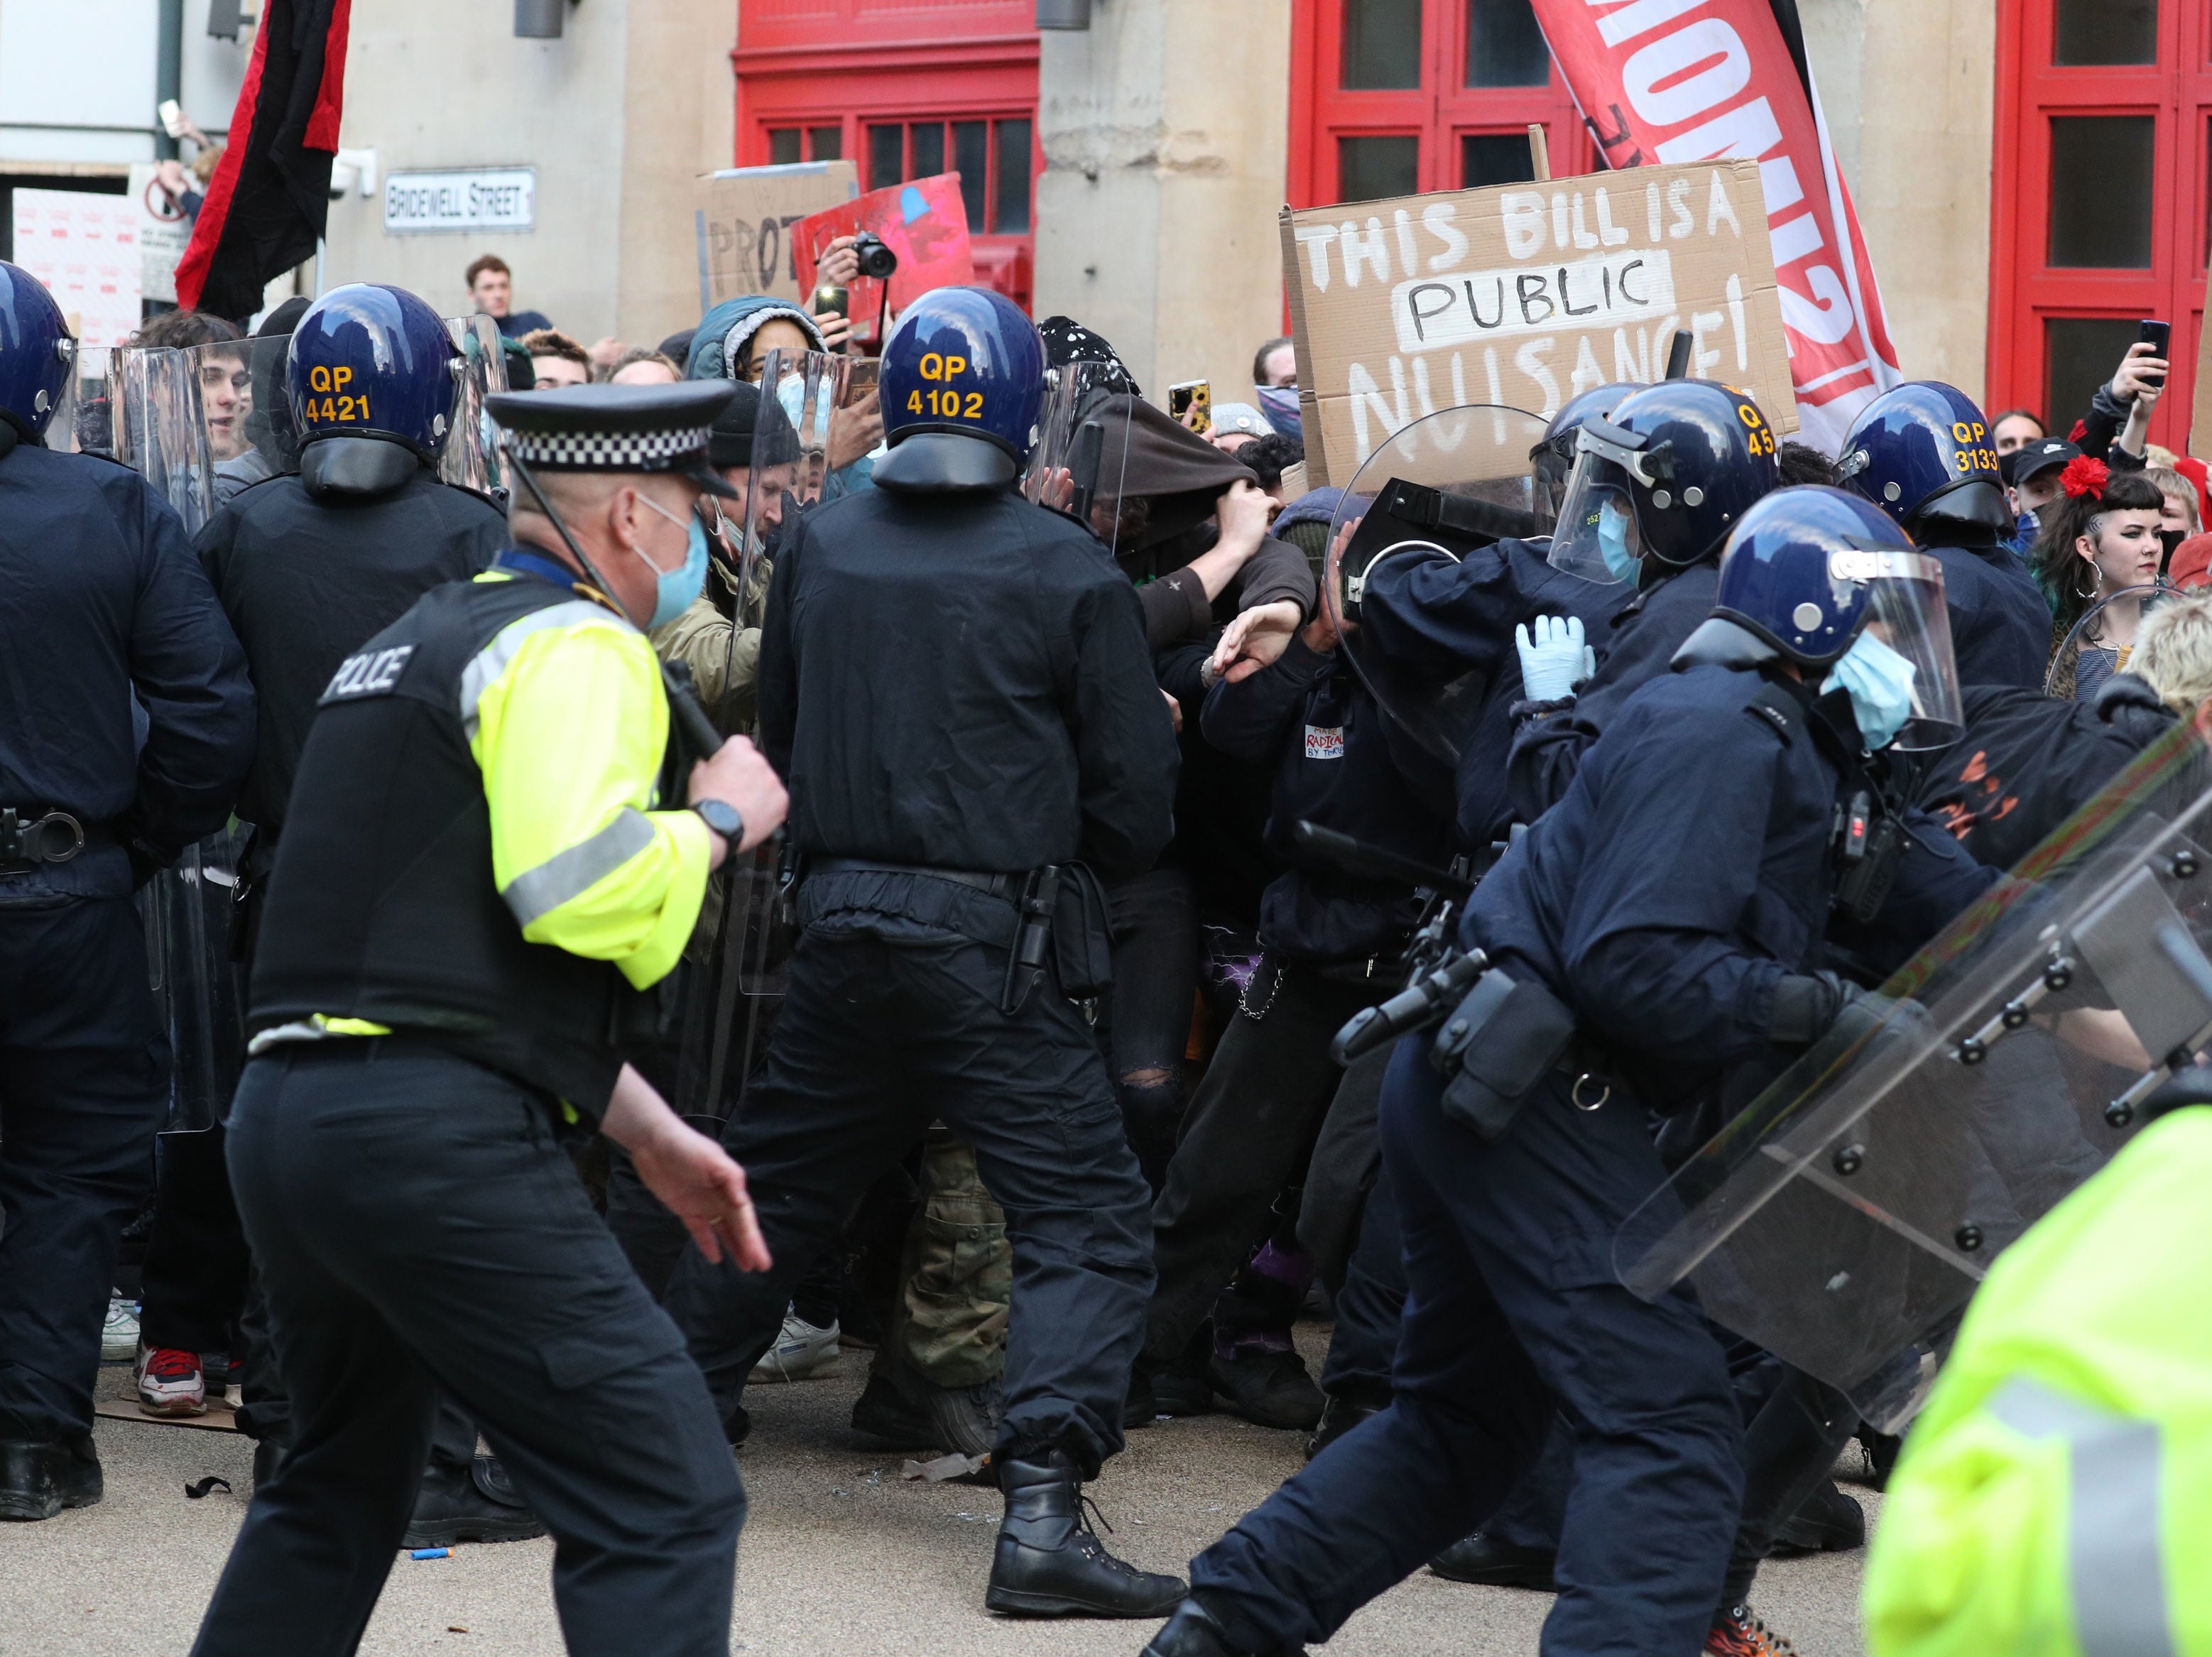 Police ‘failed to distinguish between violent and peaceful protestors’ in Bristol, according to the report